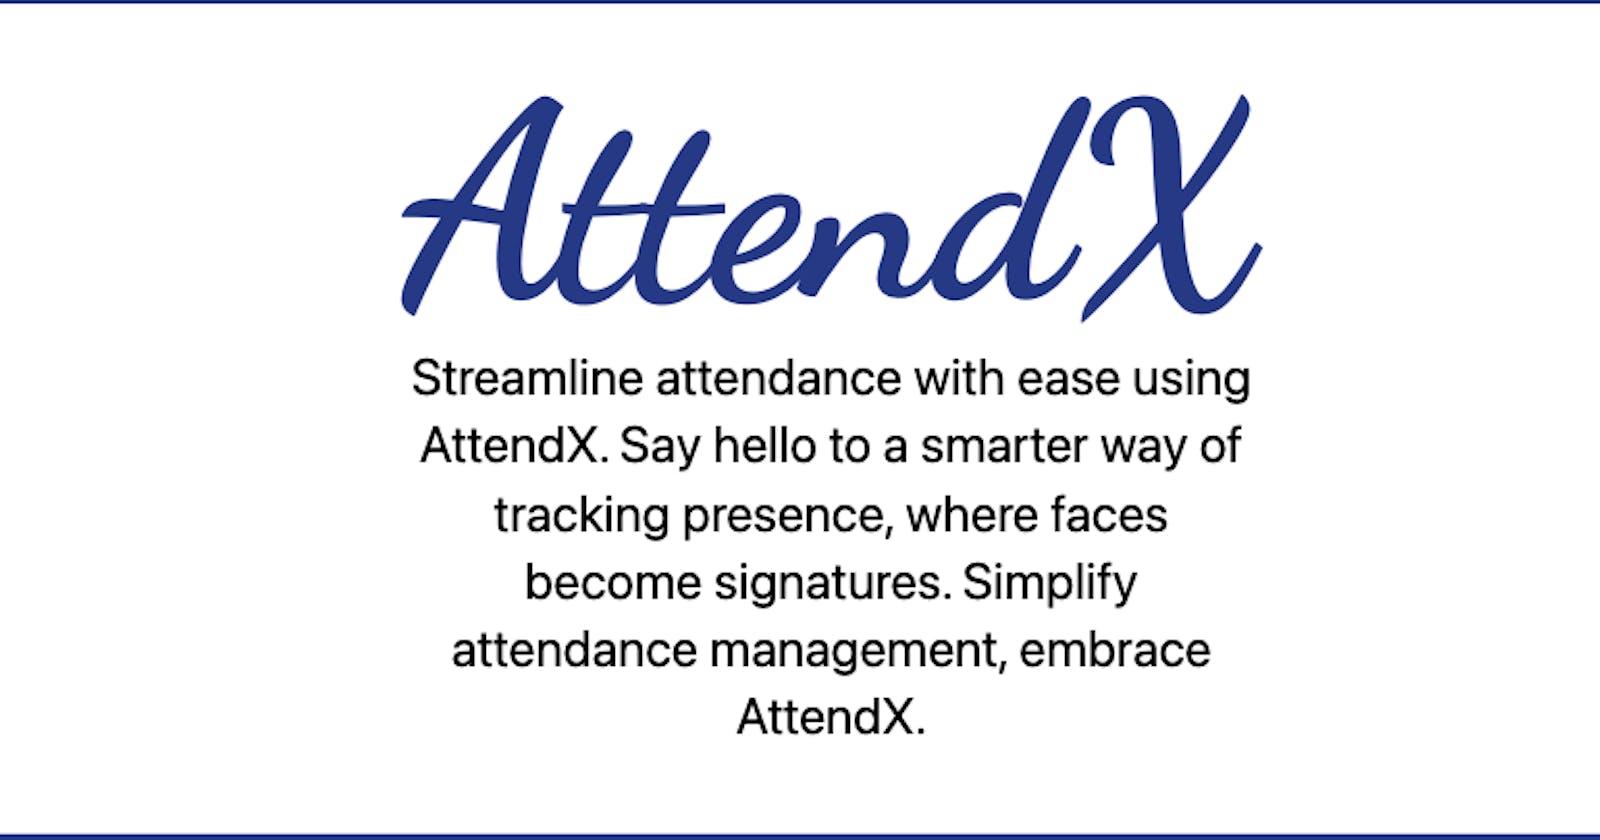 AttendX: An AI based app that marks your attendance based on face recognition